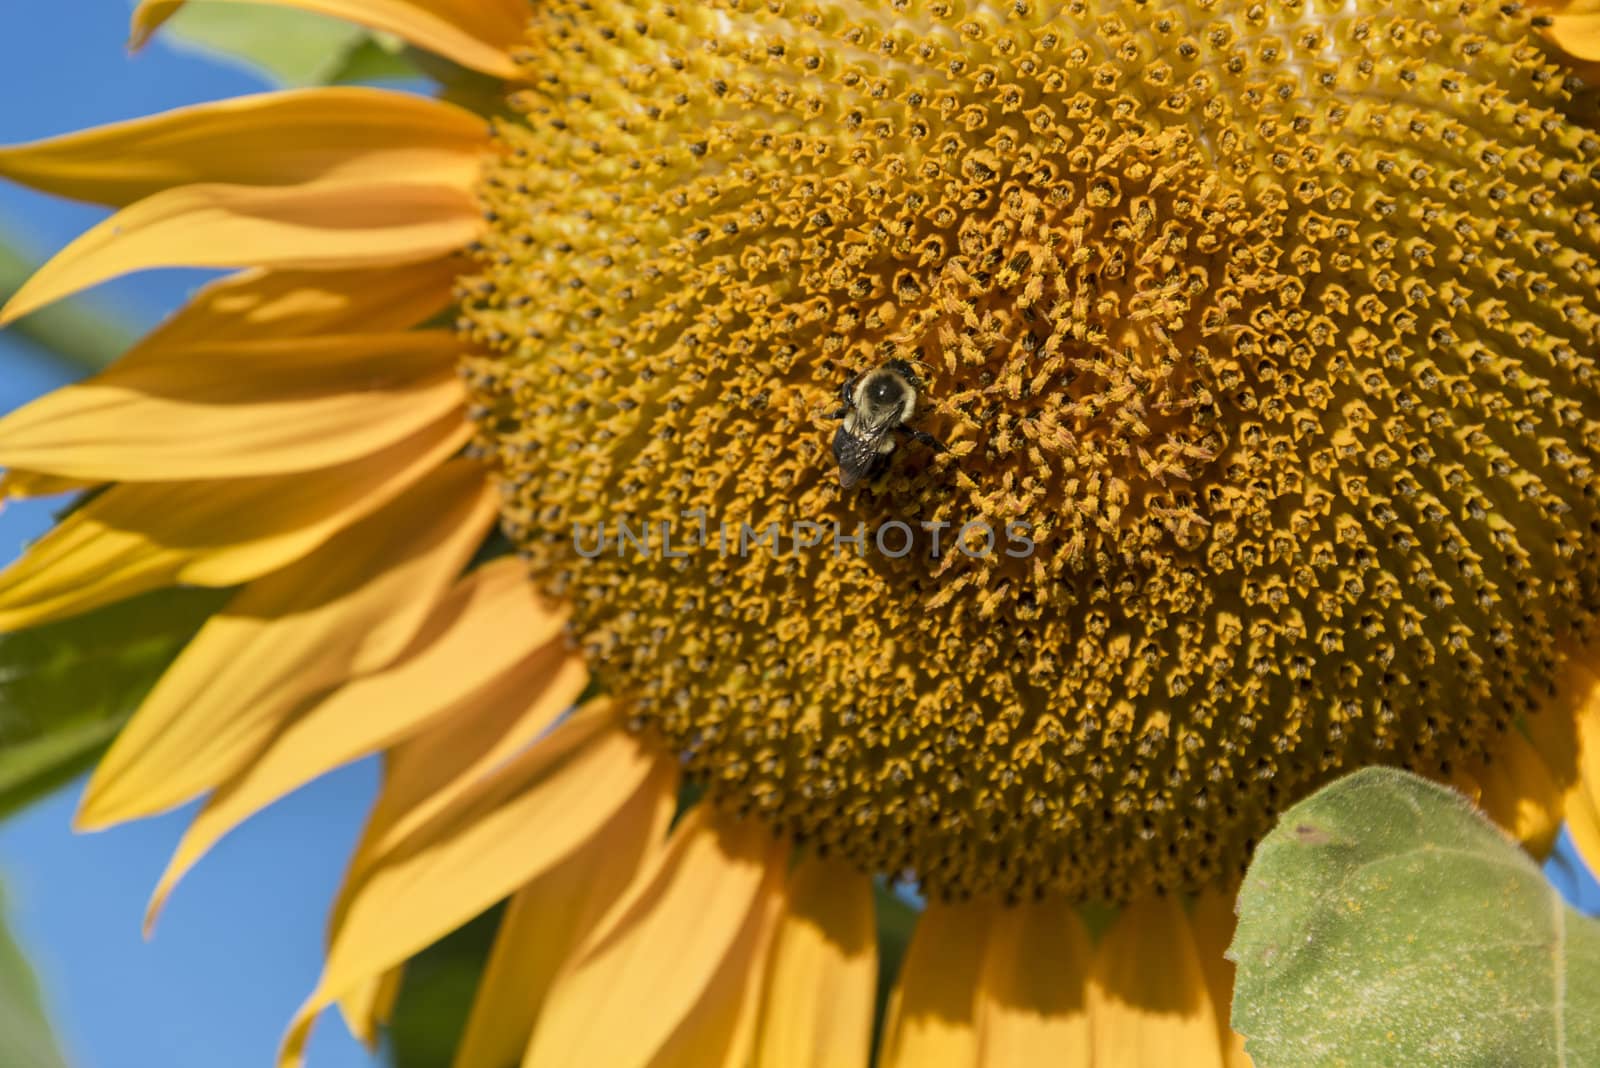 Closeup of a bee pollinating a large sunflower